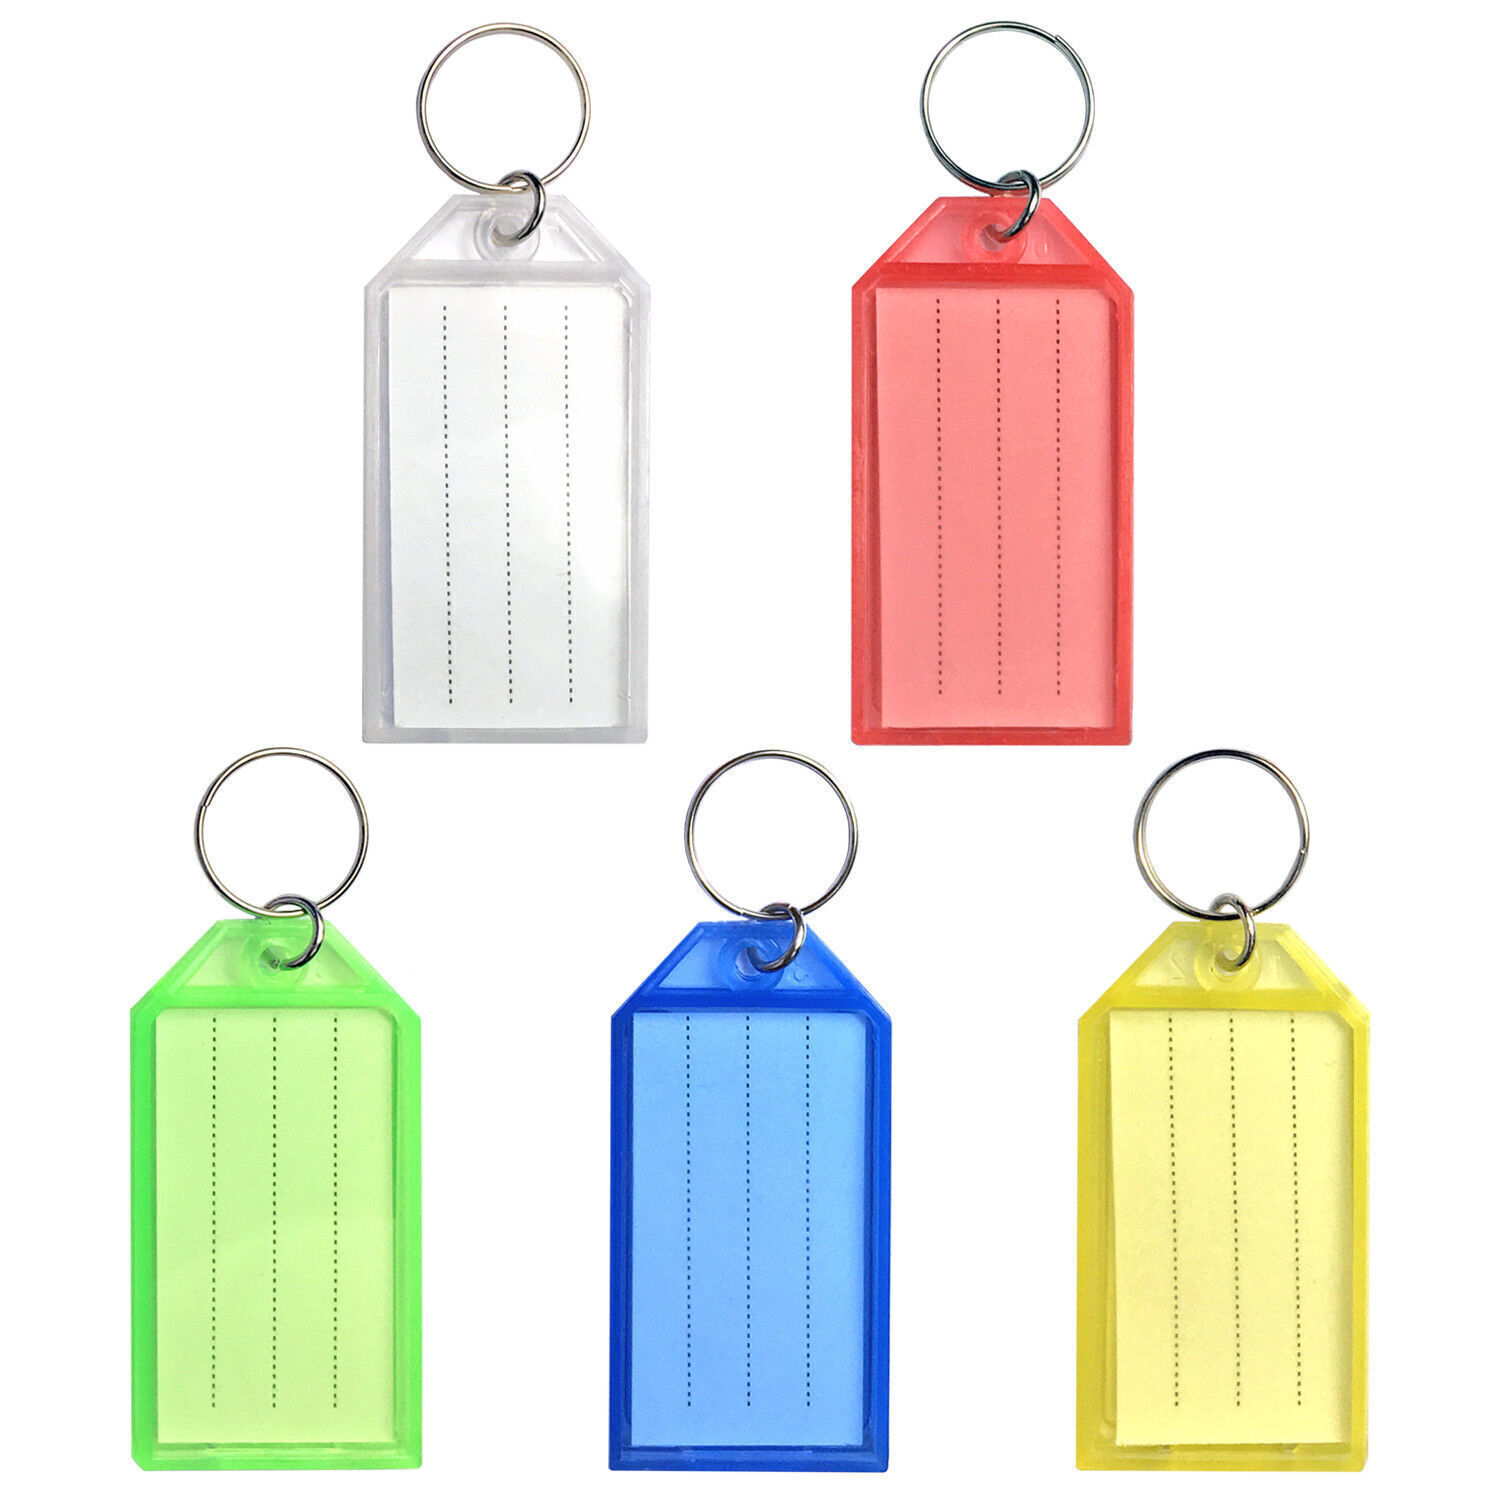 10-100 PCS Plastic Key Tags with Split Key Ring Label Window Name Tags Coded ID